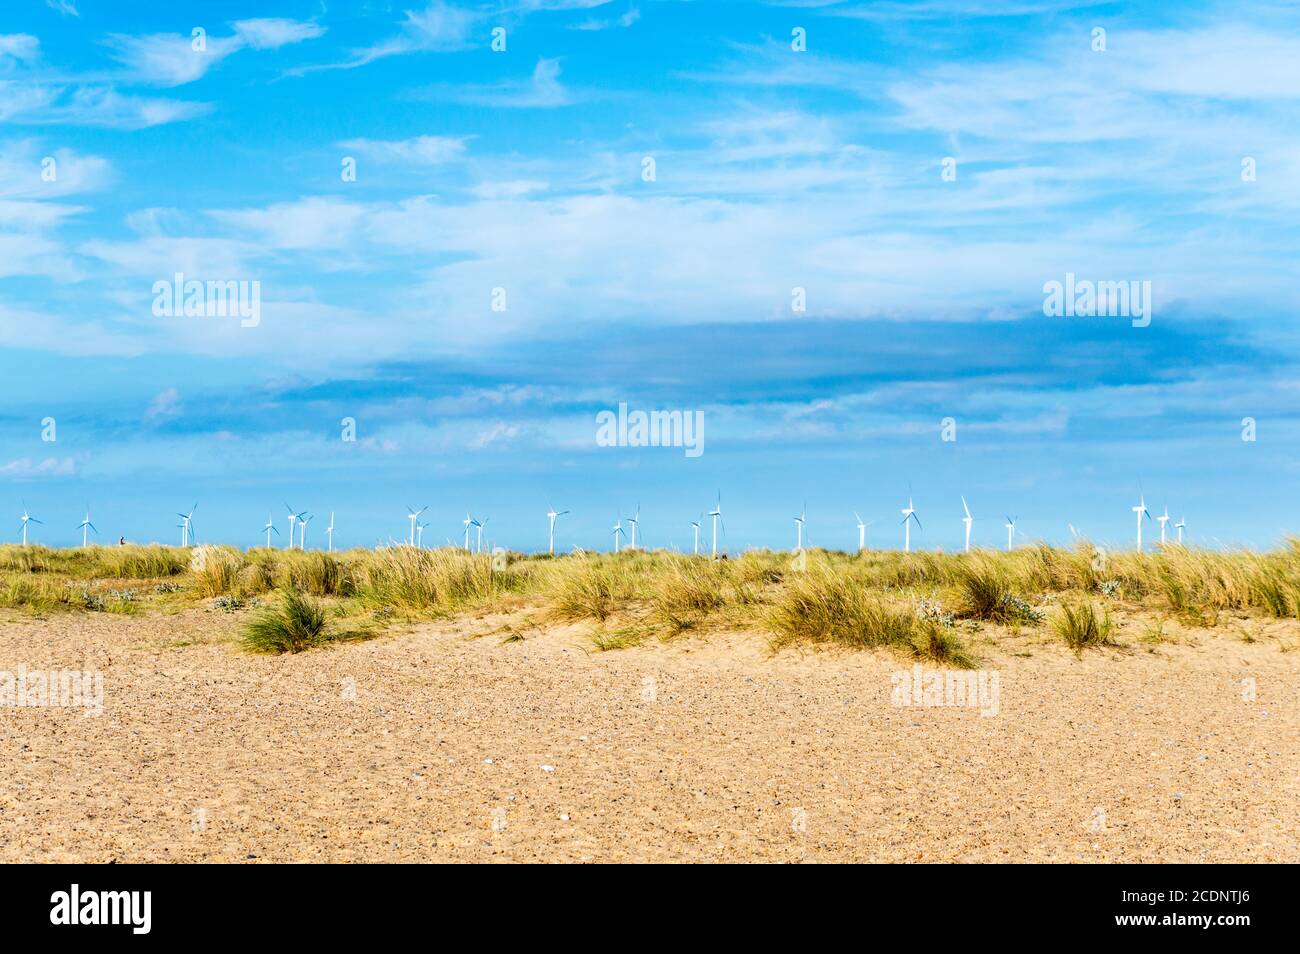 Great Yarmouth beach sand dunes and Marram grass with wind turbine farm in background Stock Photo